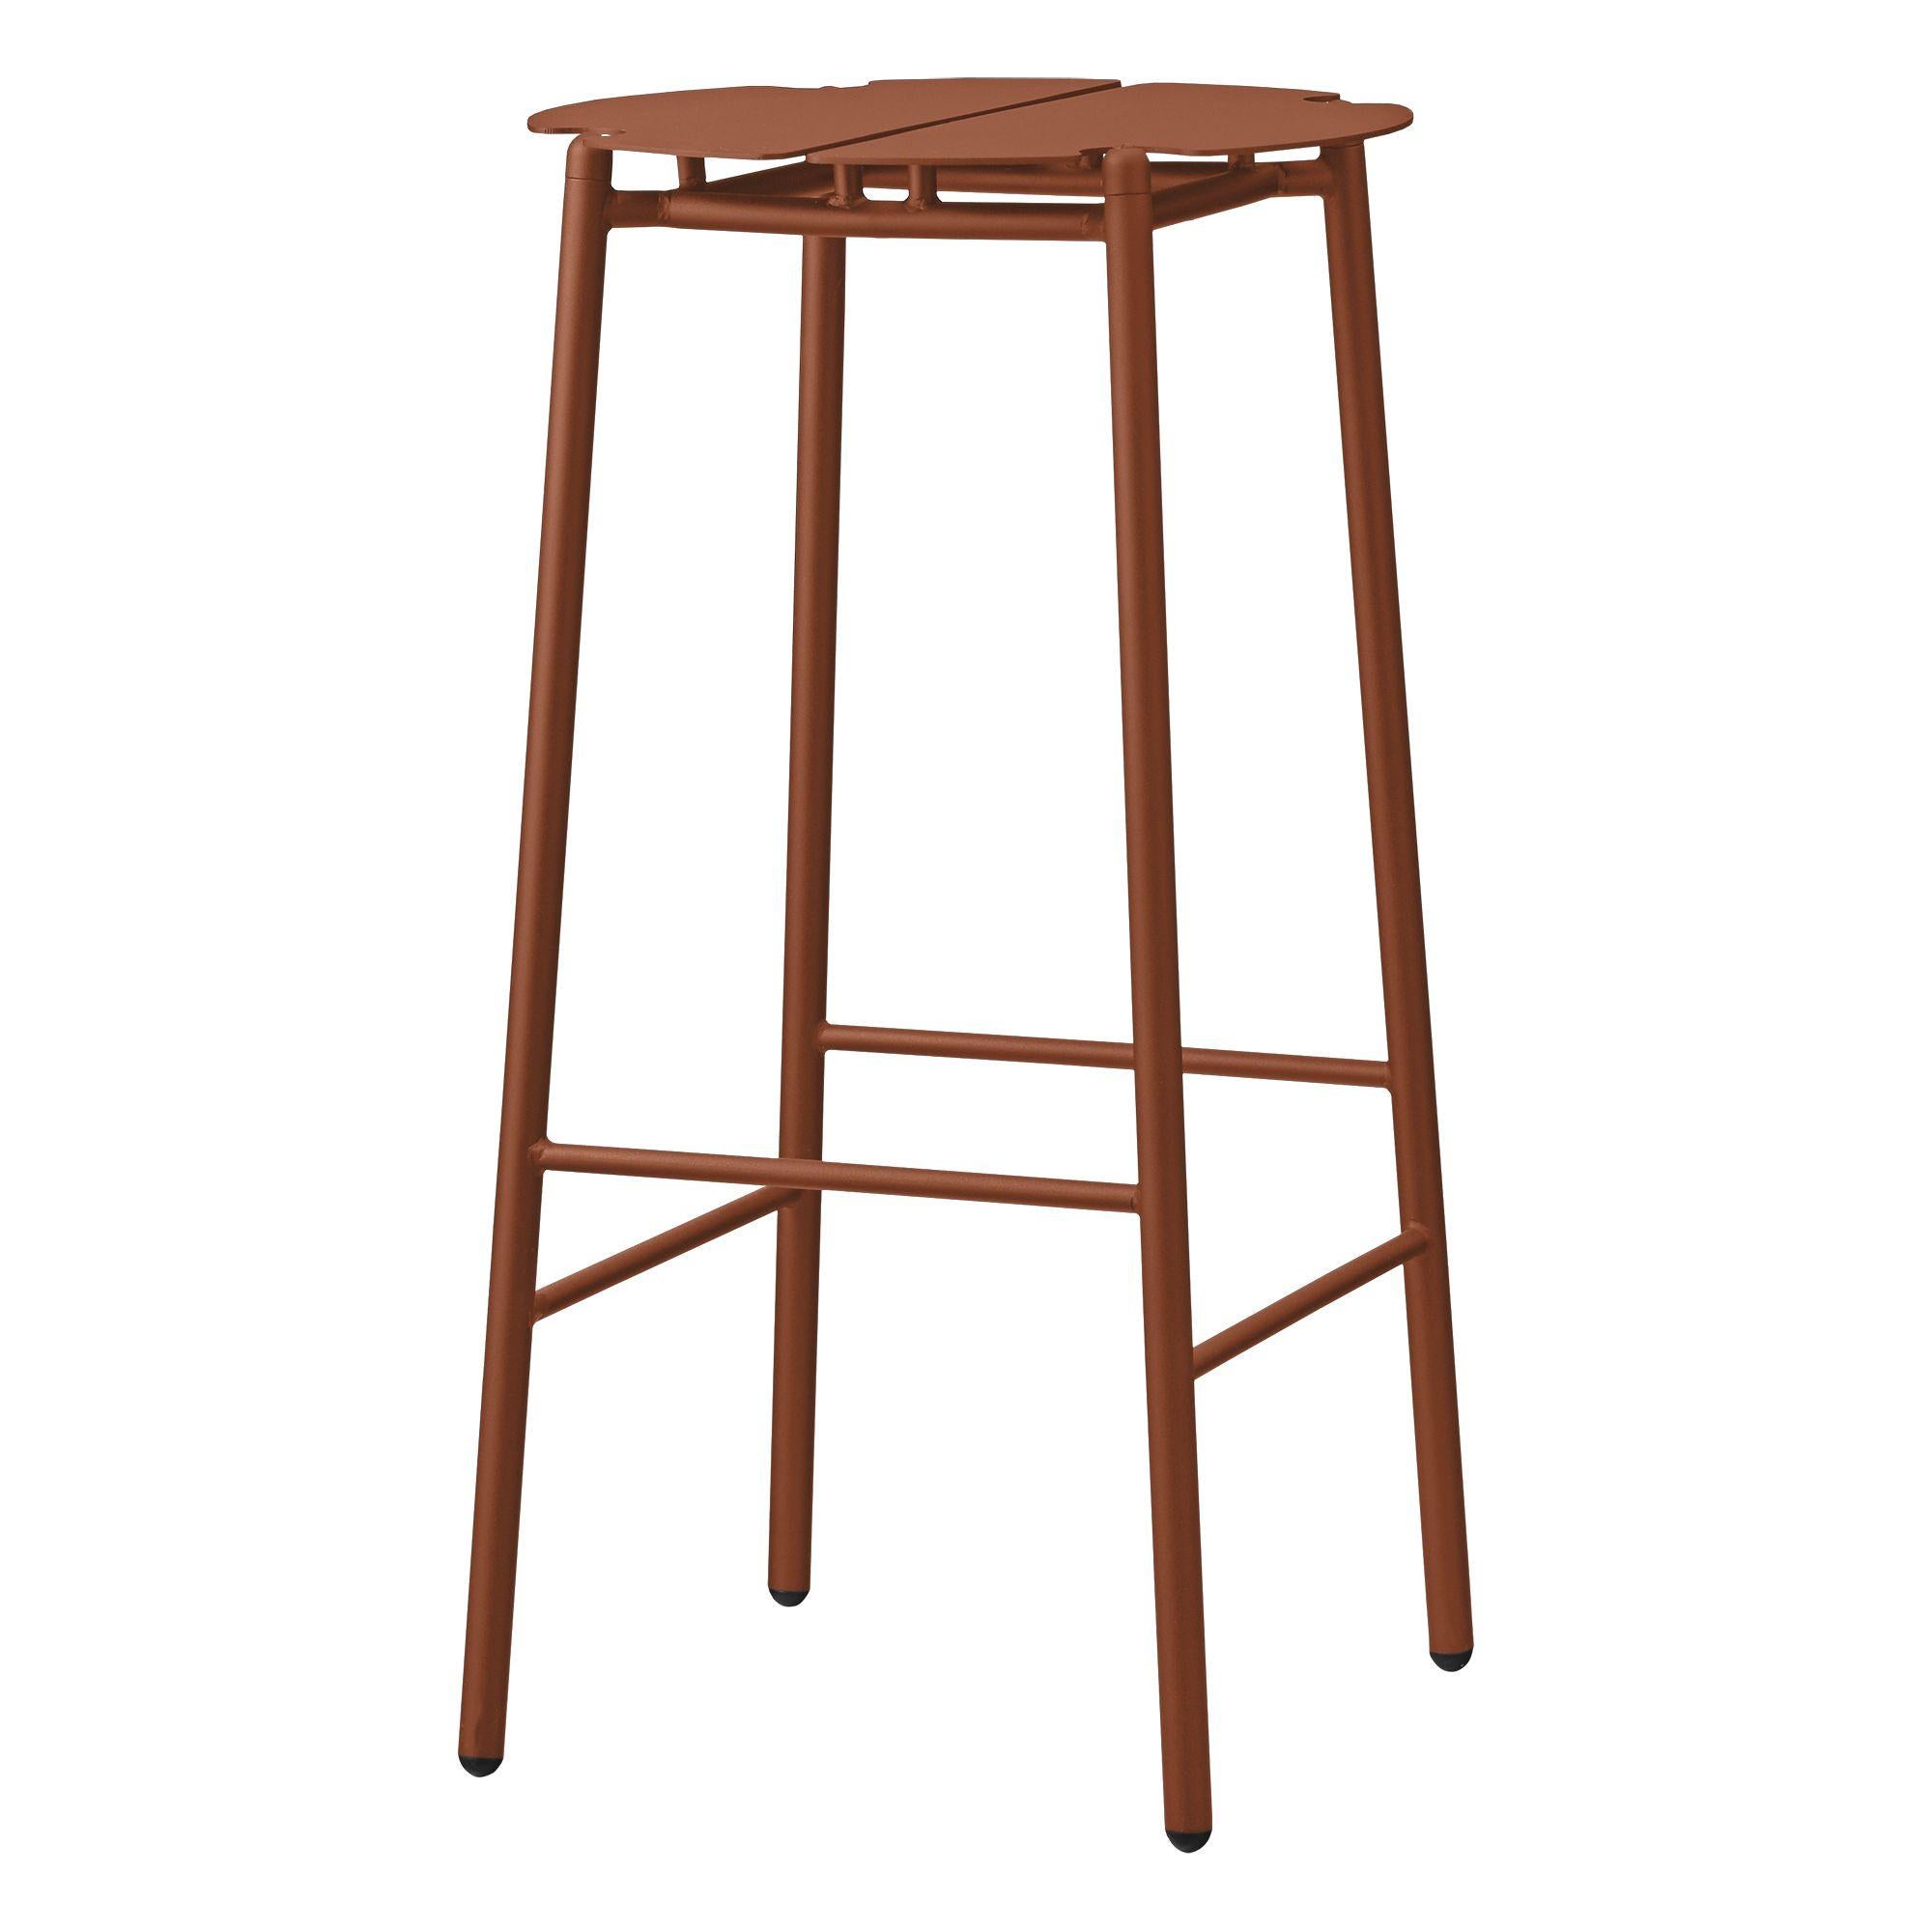 Powder-Coated Forest Minimalist Bar Stool For Sale